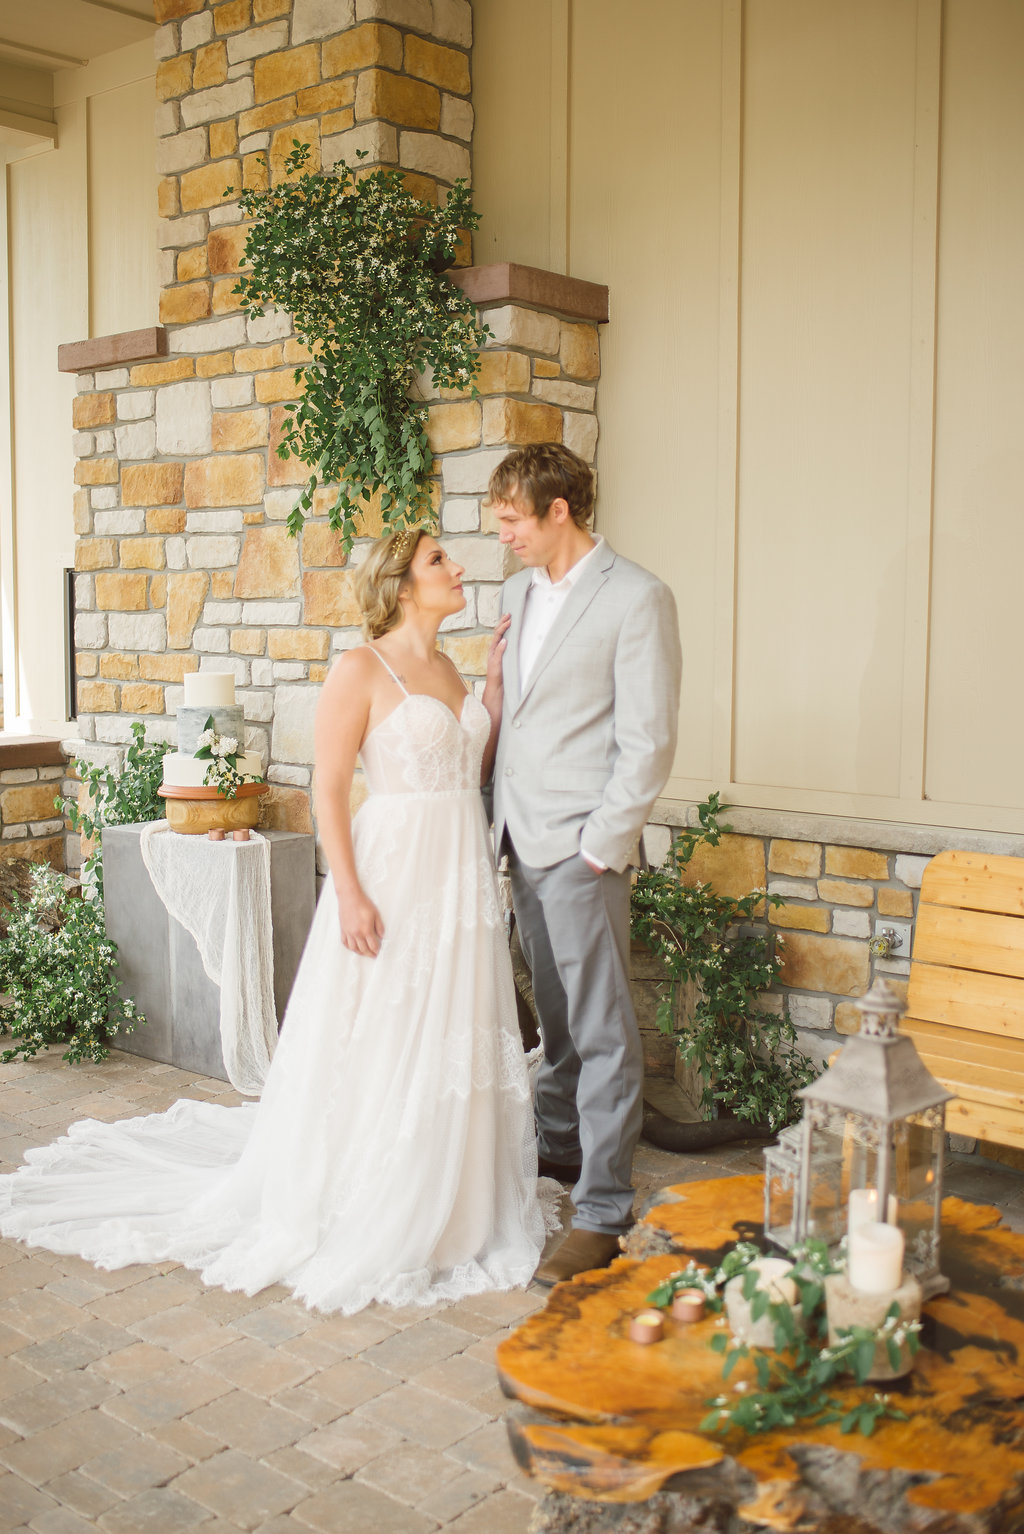 Spring Wedding Ideas | Emilee Mae Photography | The Day's Design